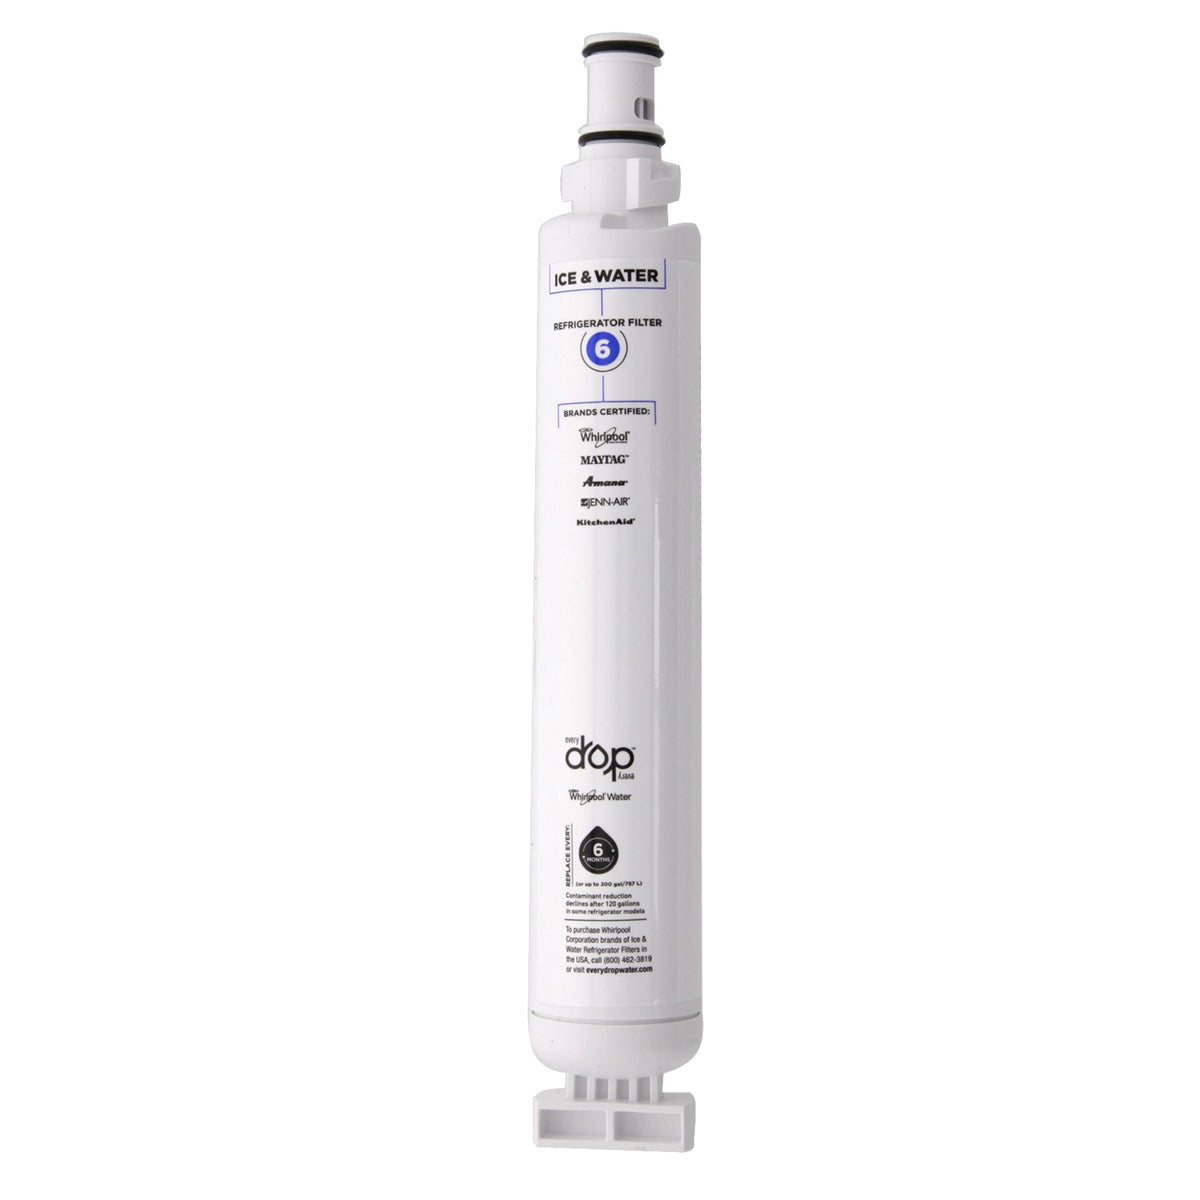 EveryDrop Whirlpool EDR6D1 (Filter 6)  Ice and Water Refrigerator Filter